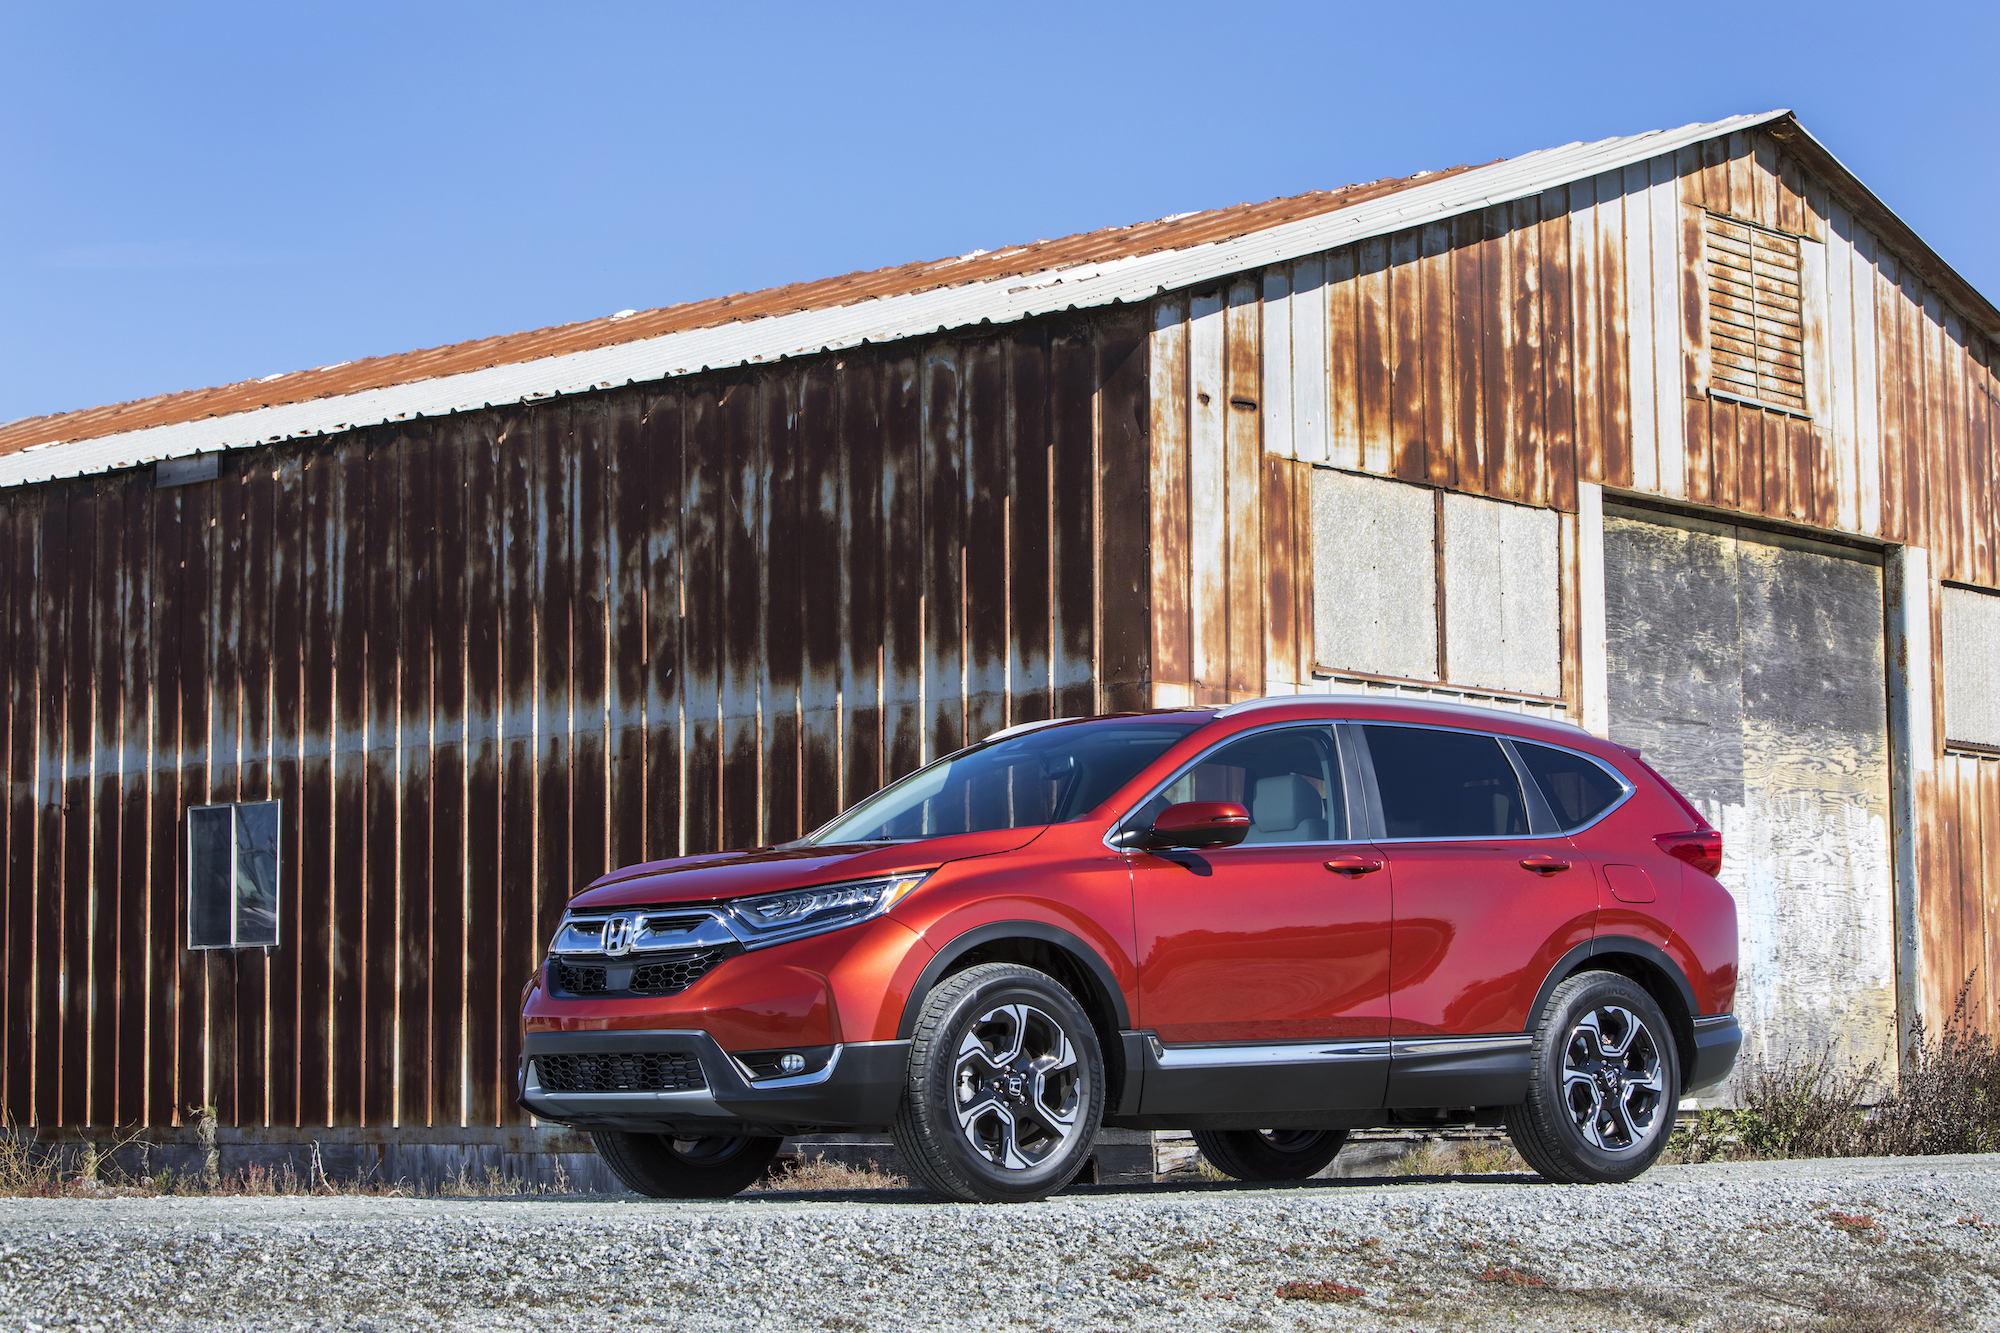 A metallic red 2018 Honda CR-V parked on gravel in front of a rusty barn and blue sky